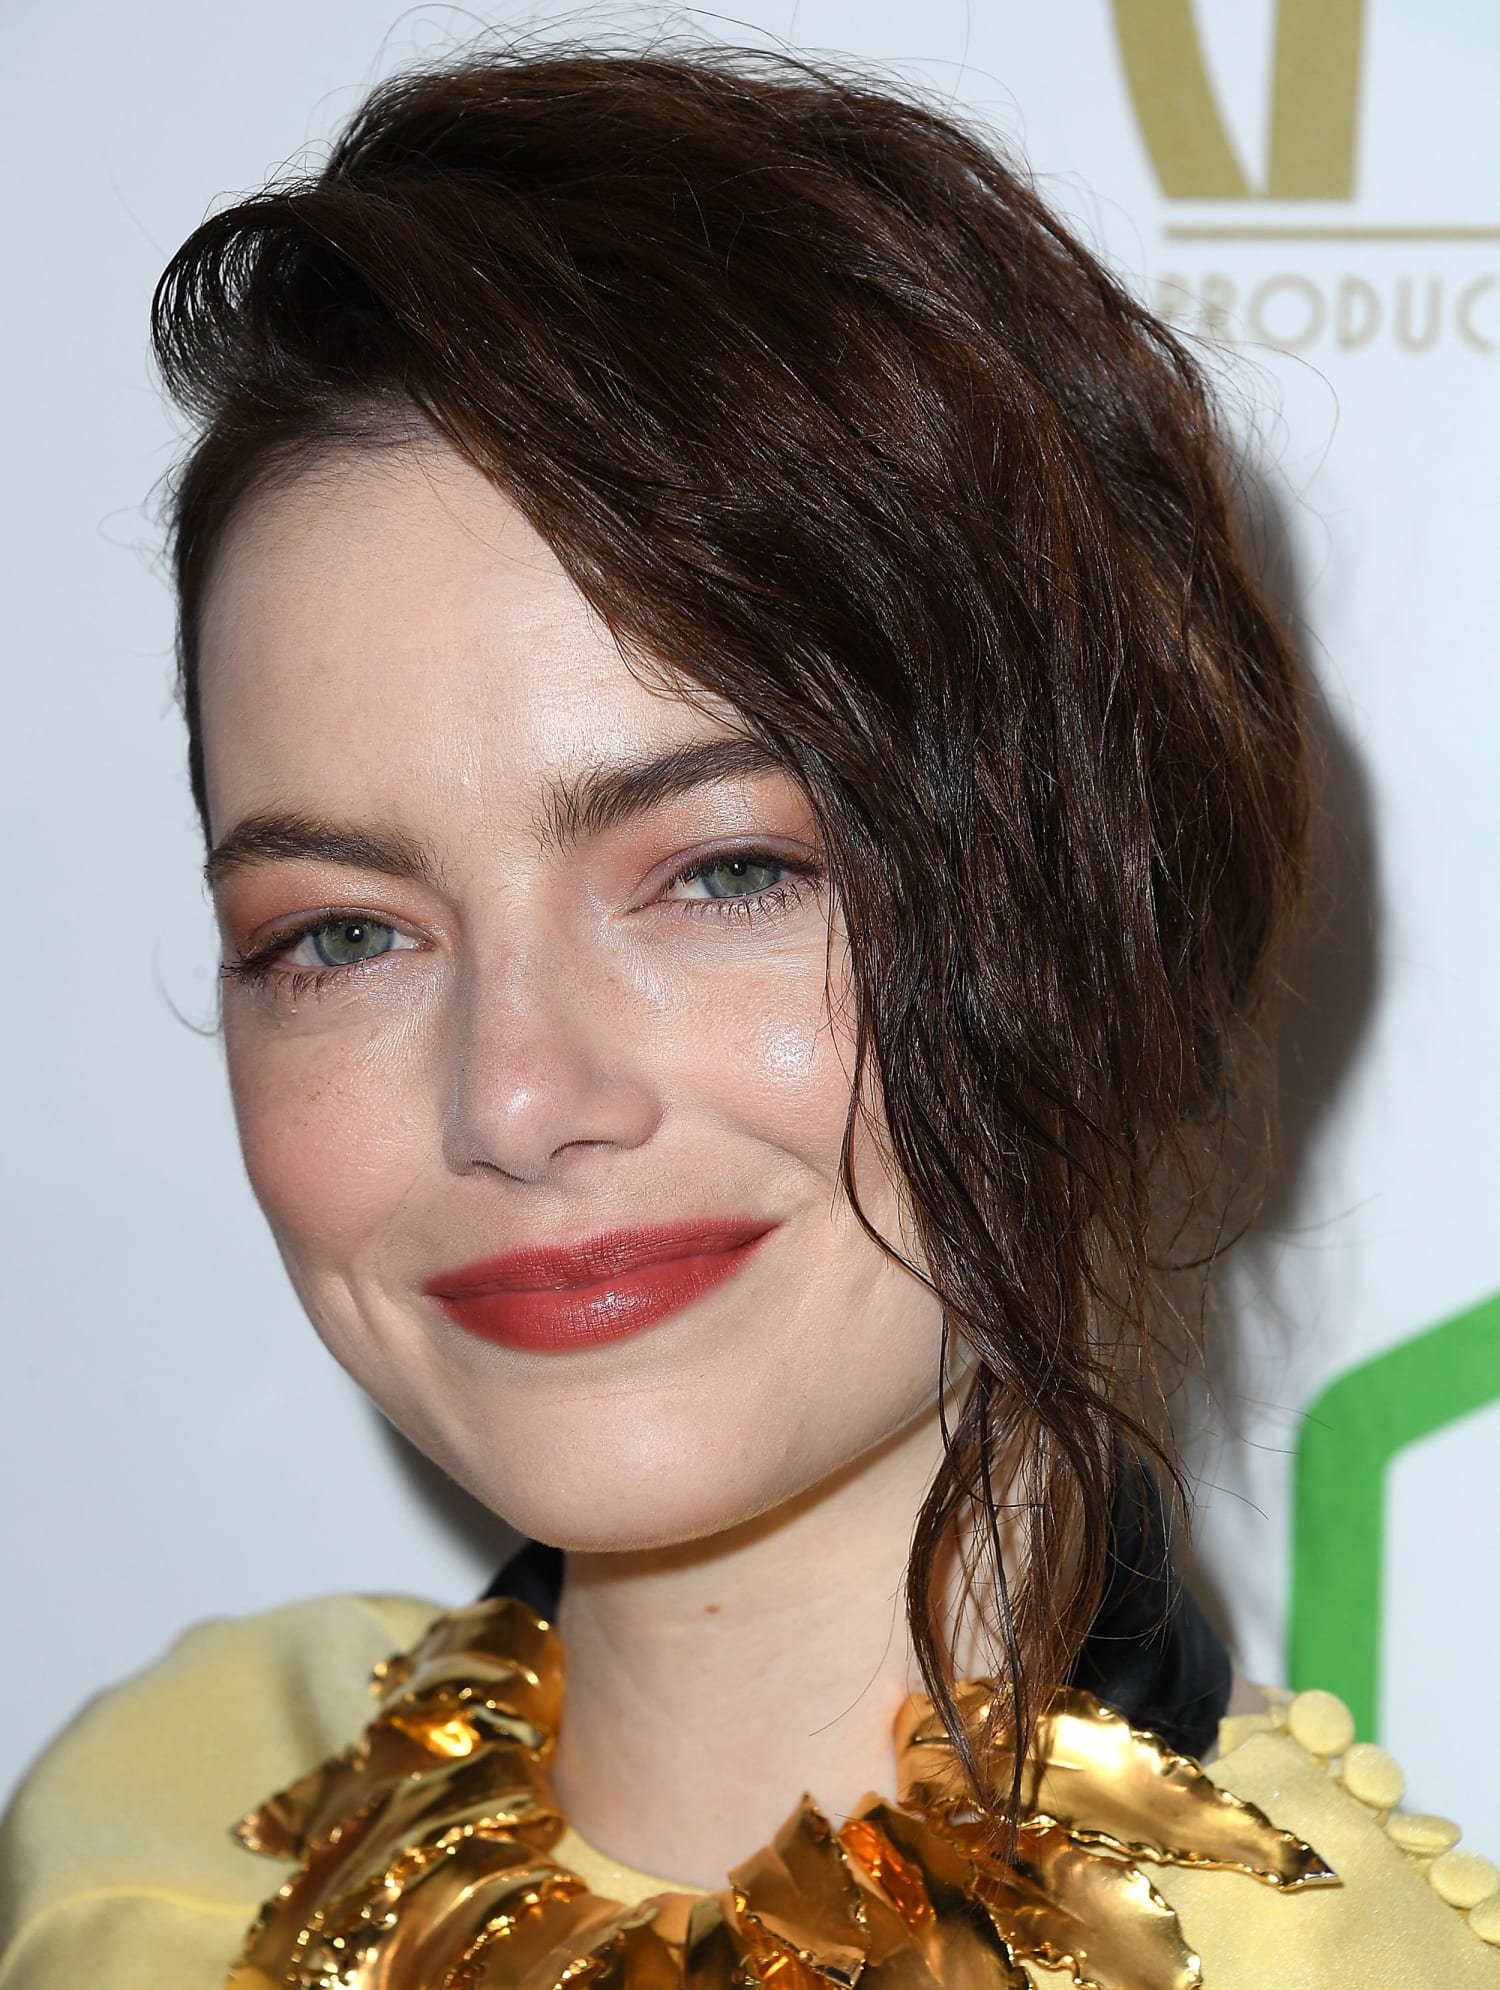 Emma Stone is Brunette at the Met Gala